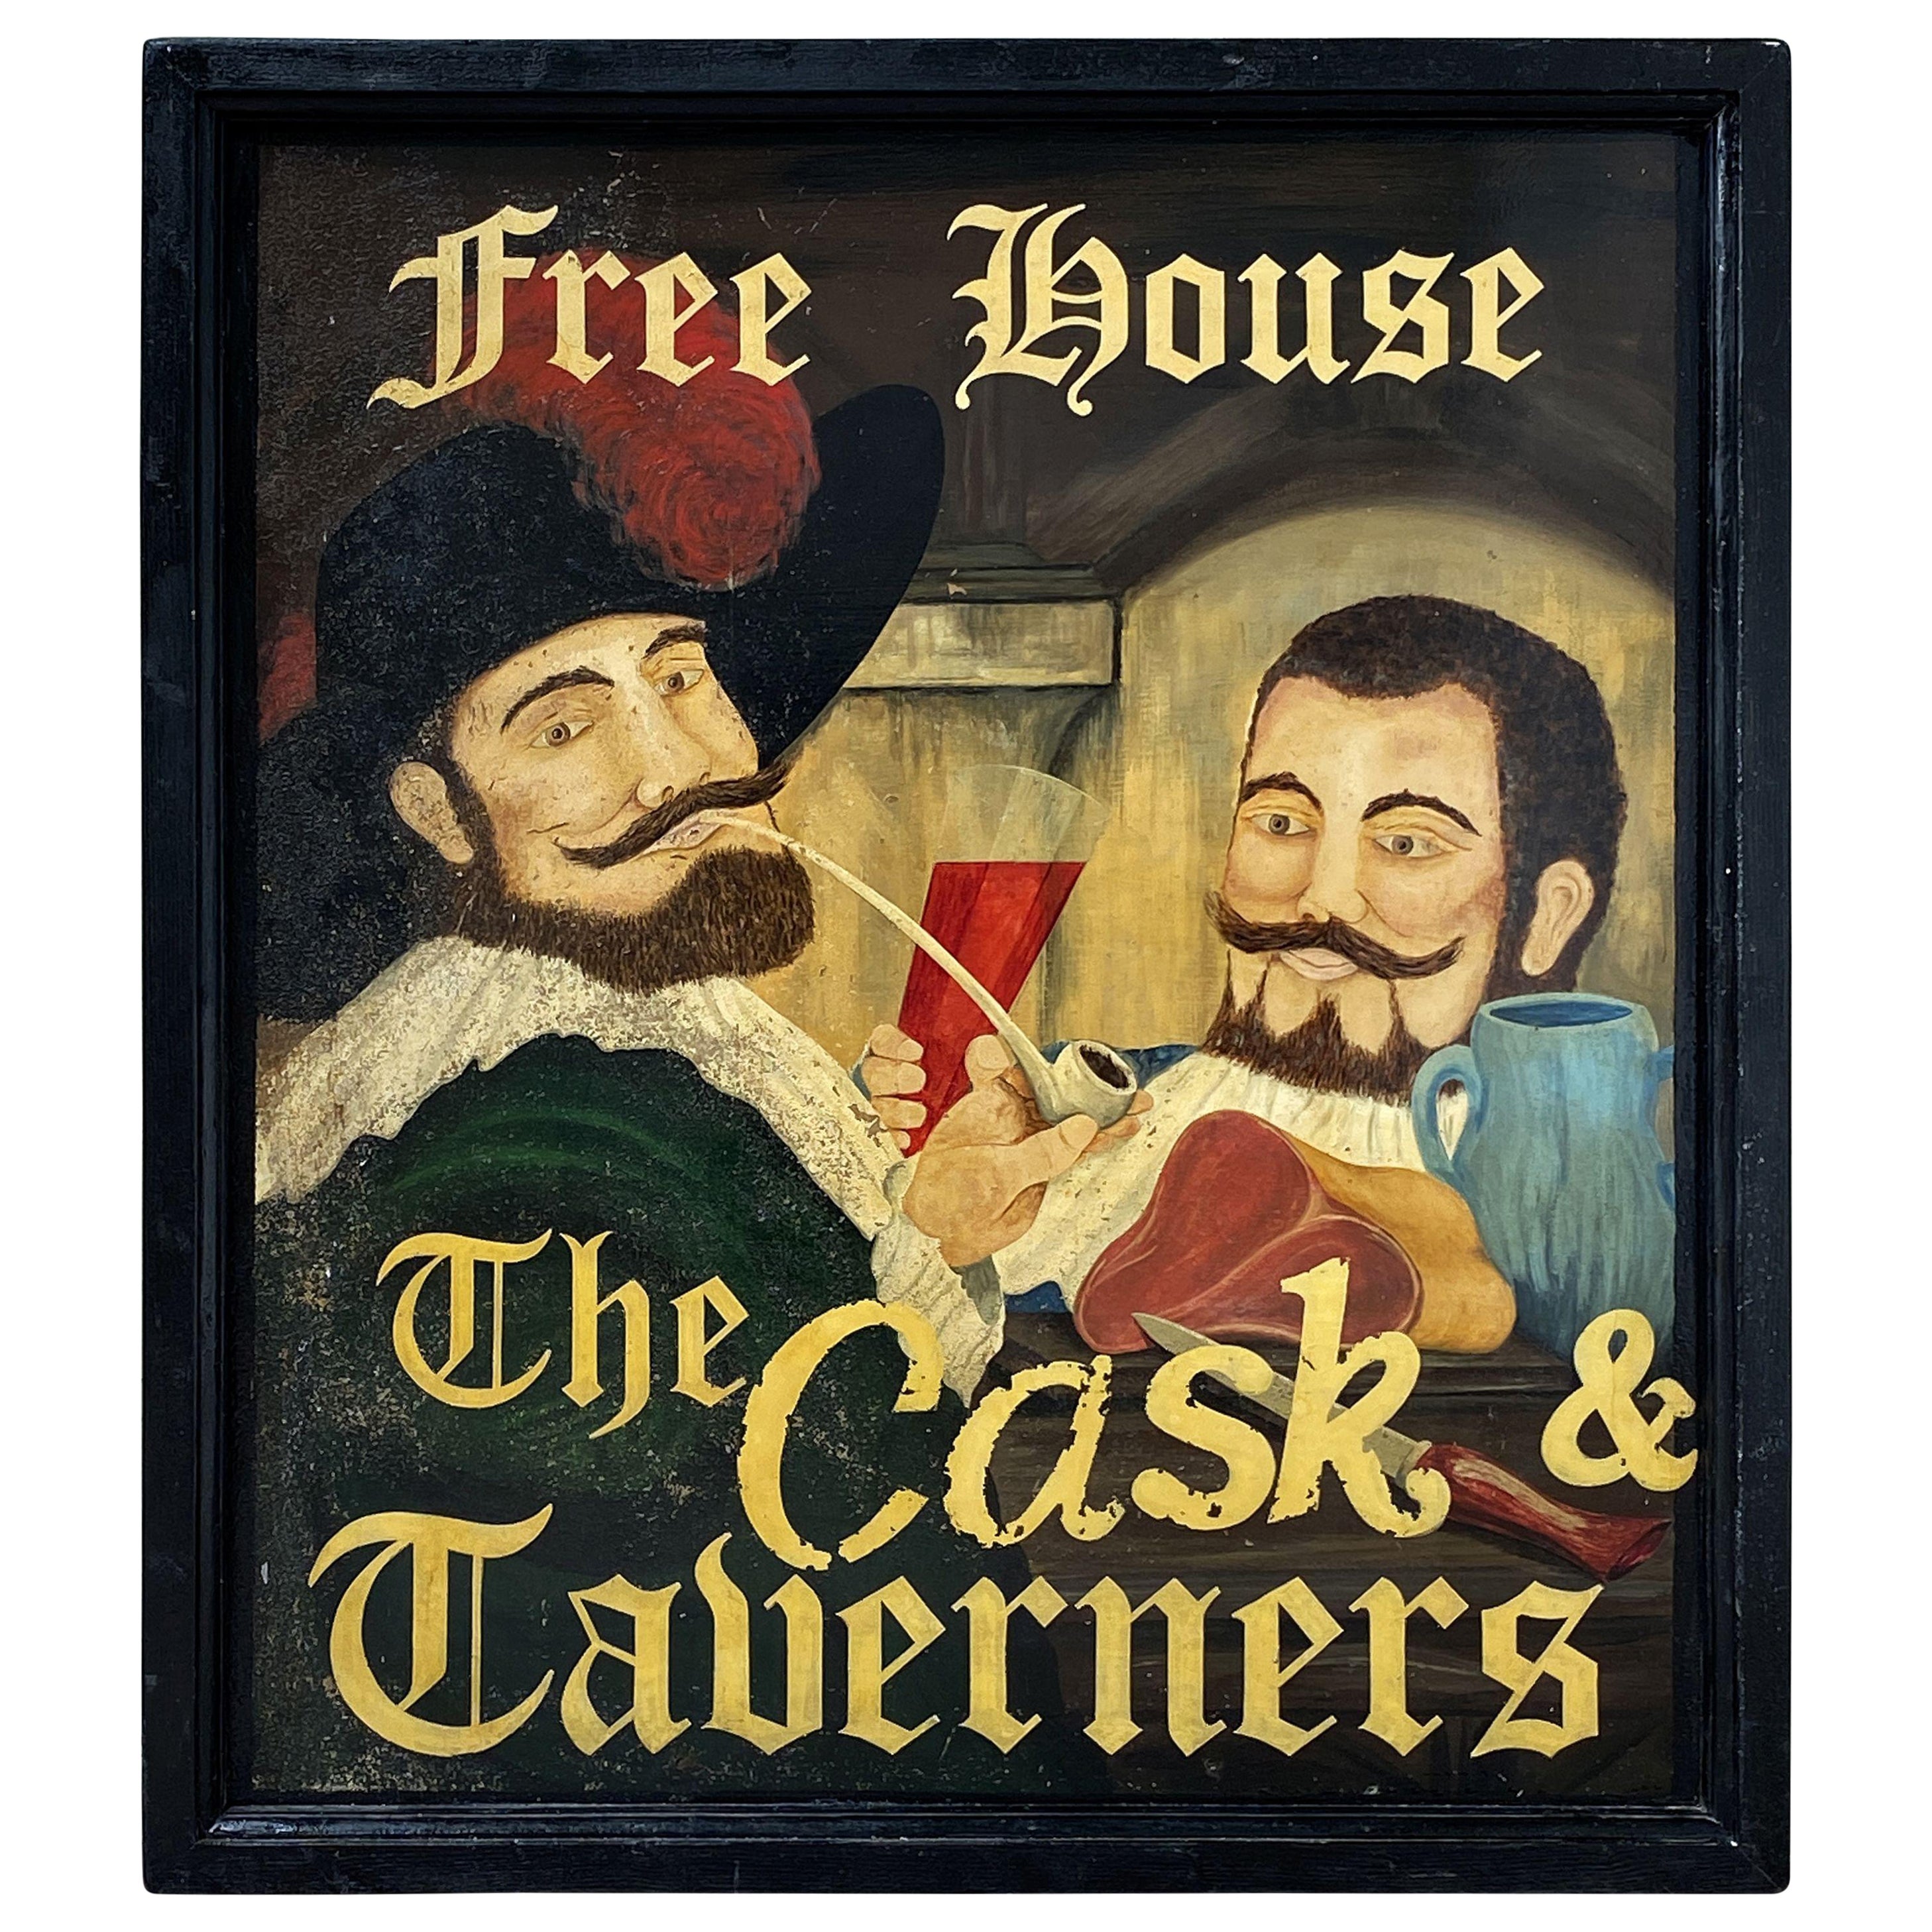 English Pub Sign, "Free House, The Cask and Taverners"